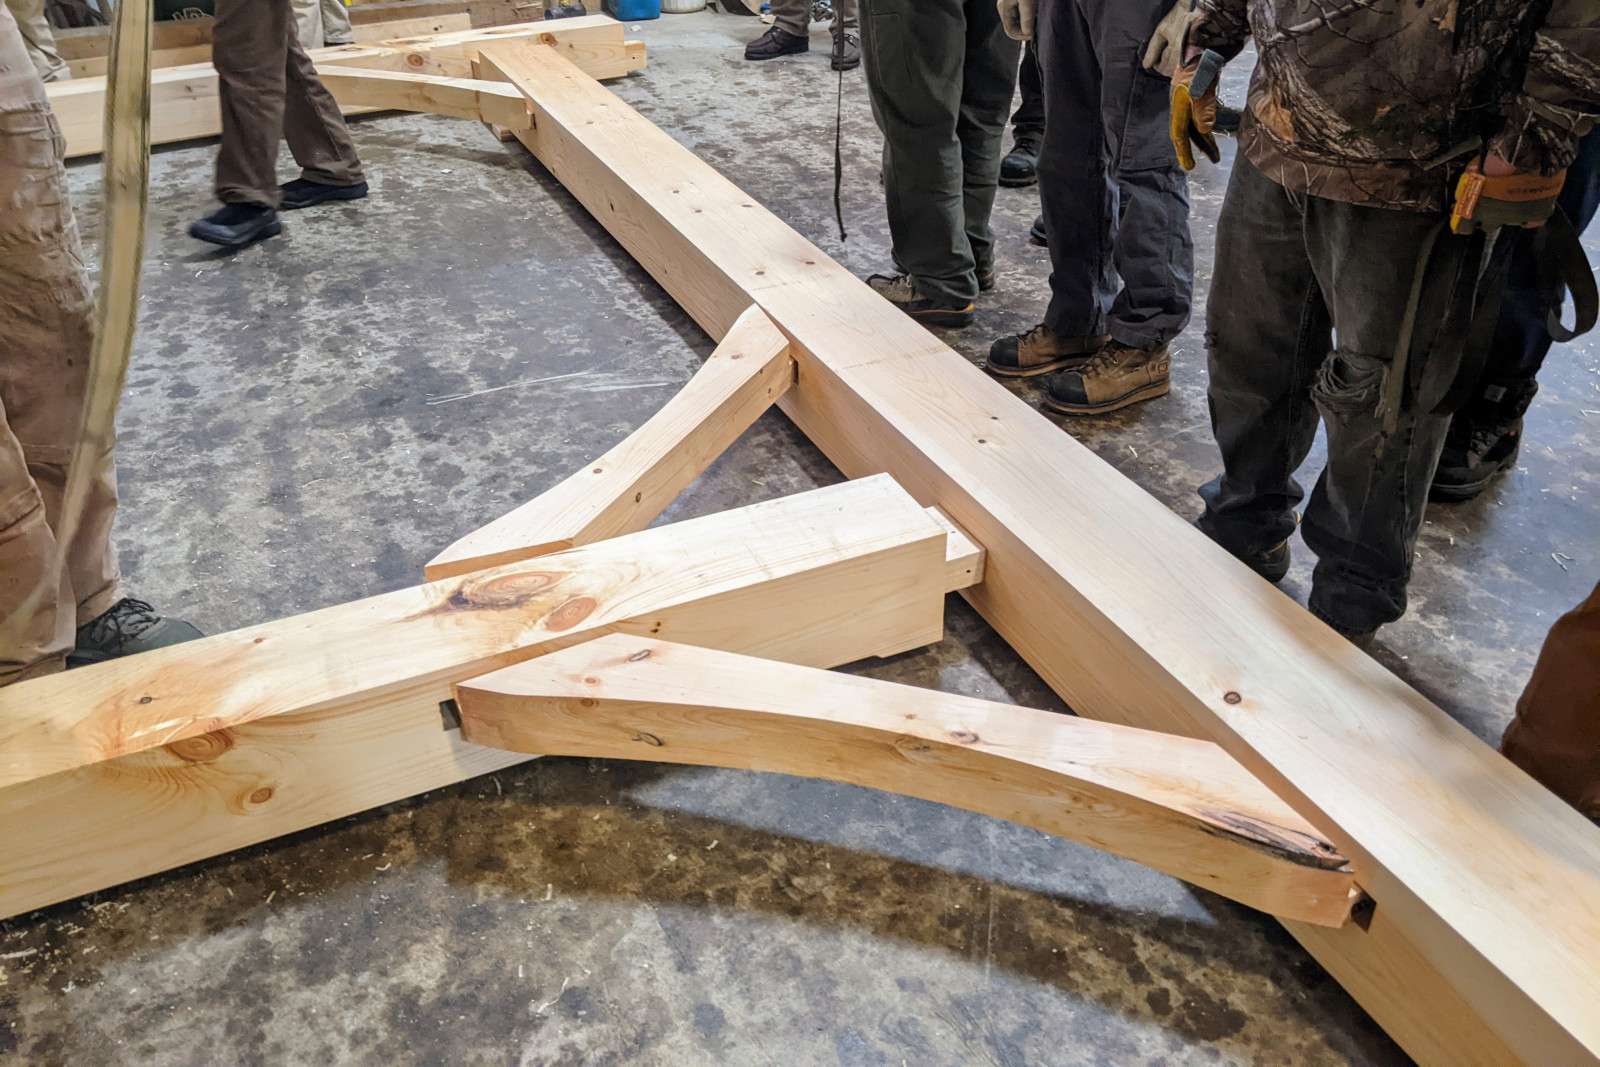 Assembling the first bent on day 5 of Shelter Institute's Purely Post & Beam class